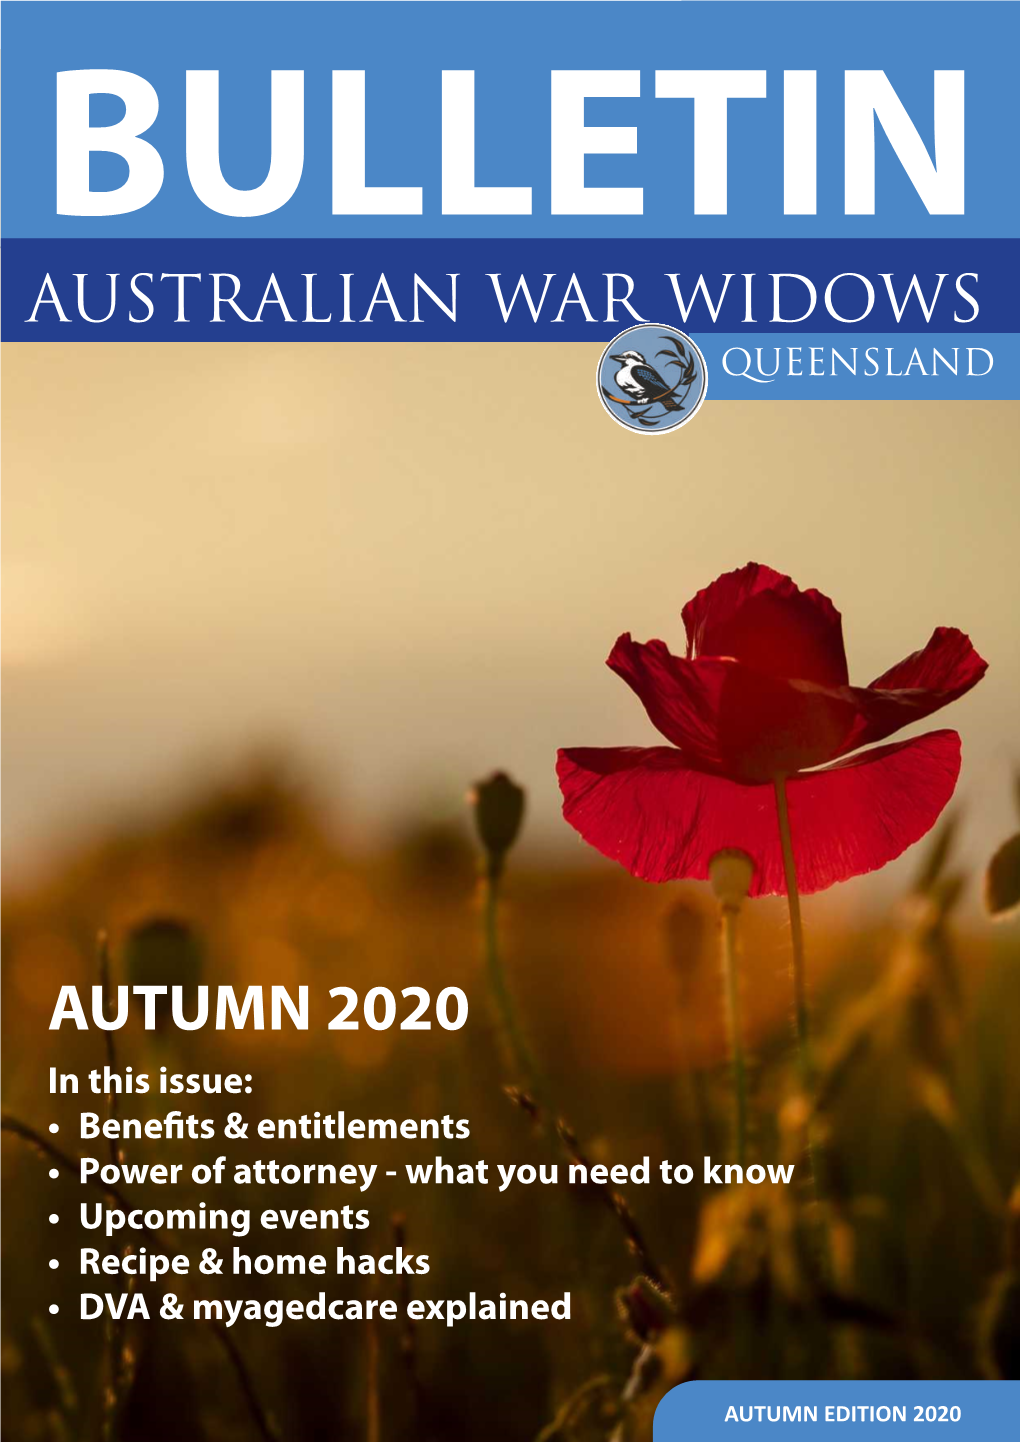 AUTUMN 2020 in This Issue: • Benefits & Entitlements • Power of Attorney - What You Need to Know • Upcoming Events • Recipe & Home Hacks • DVA & Myagedcare Explained